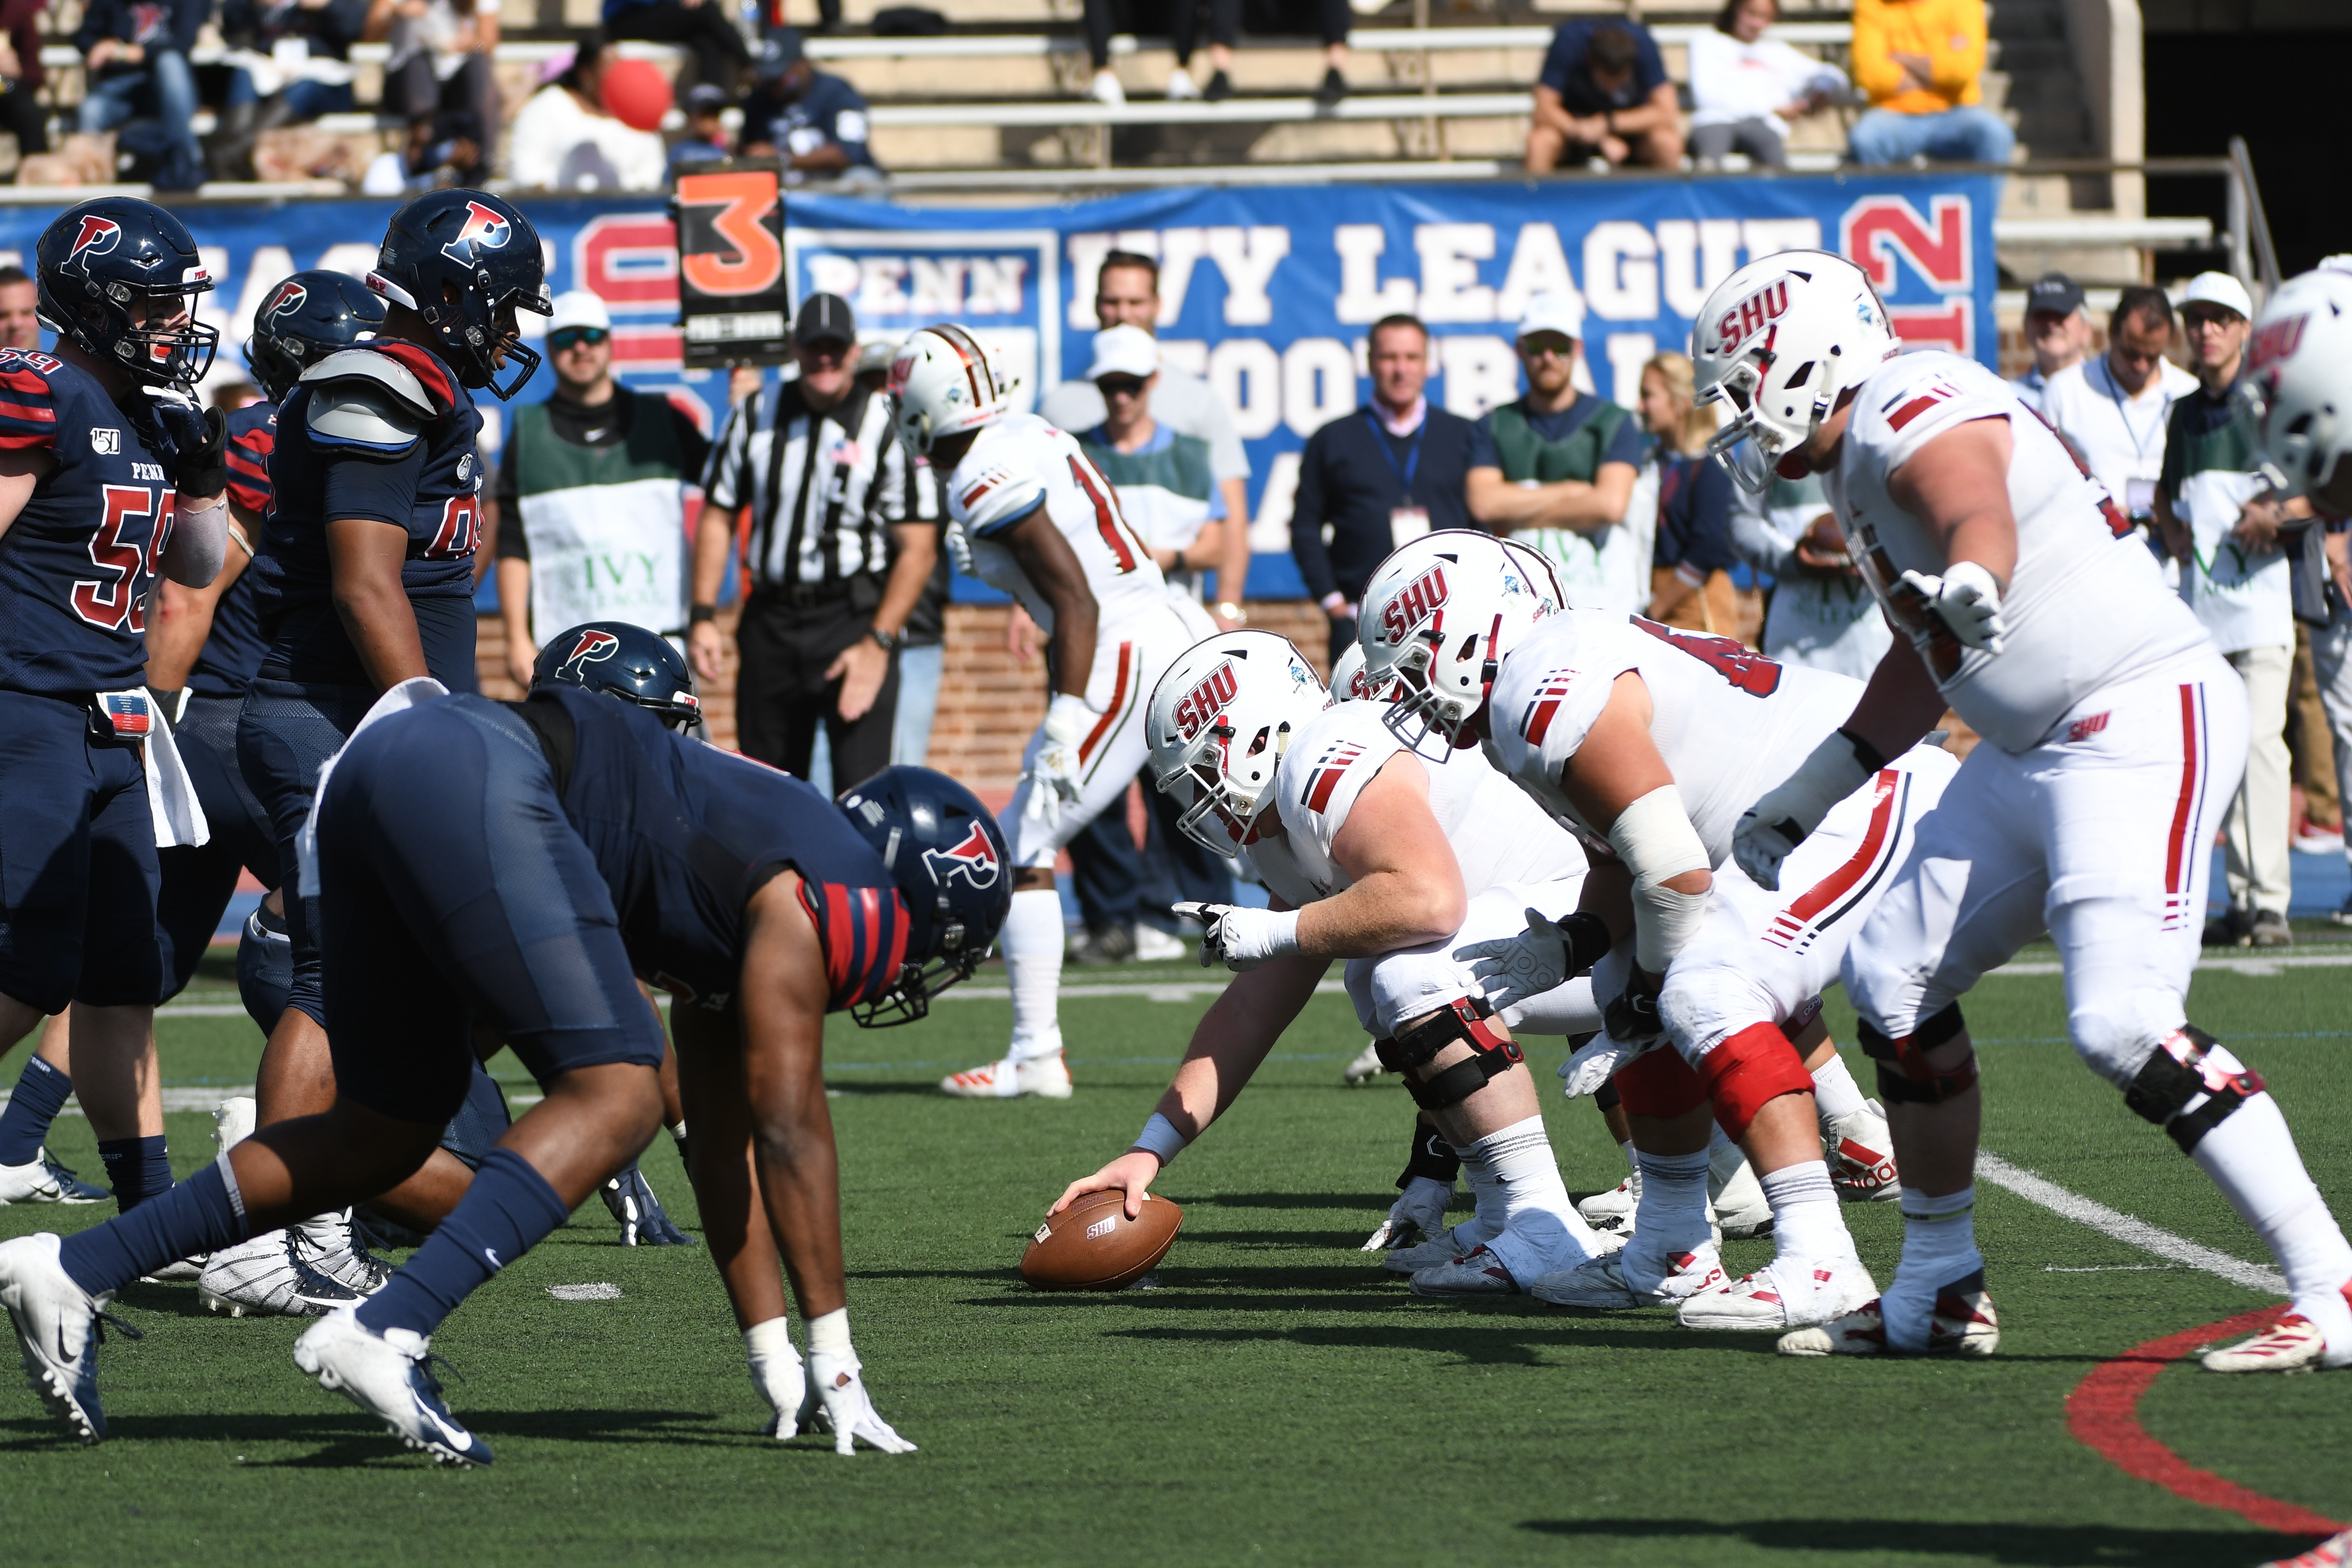 COLLEGE FOOTBALL: OCT 12 Sacred Heart at Penn